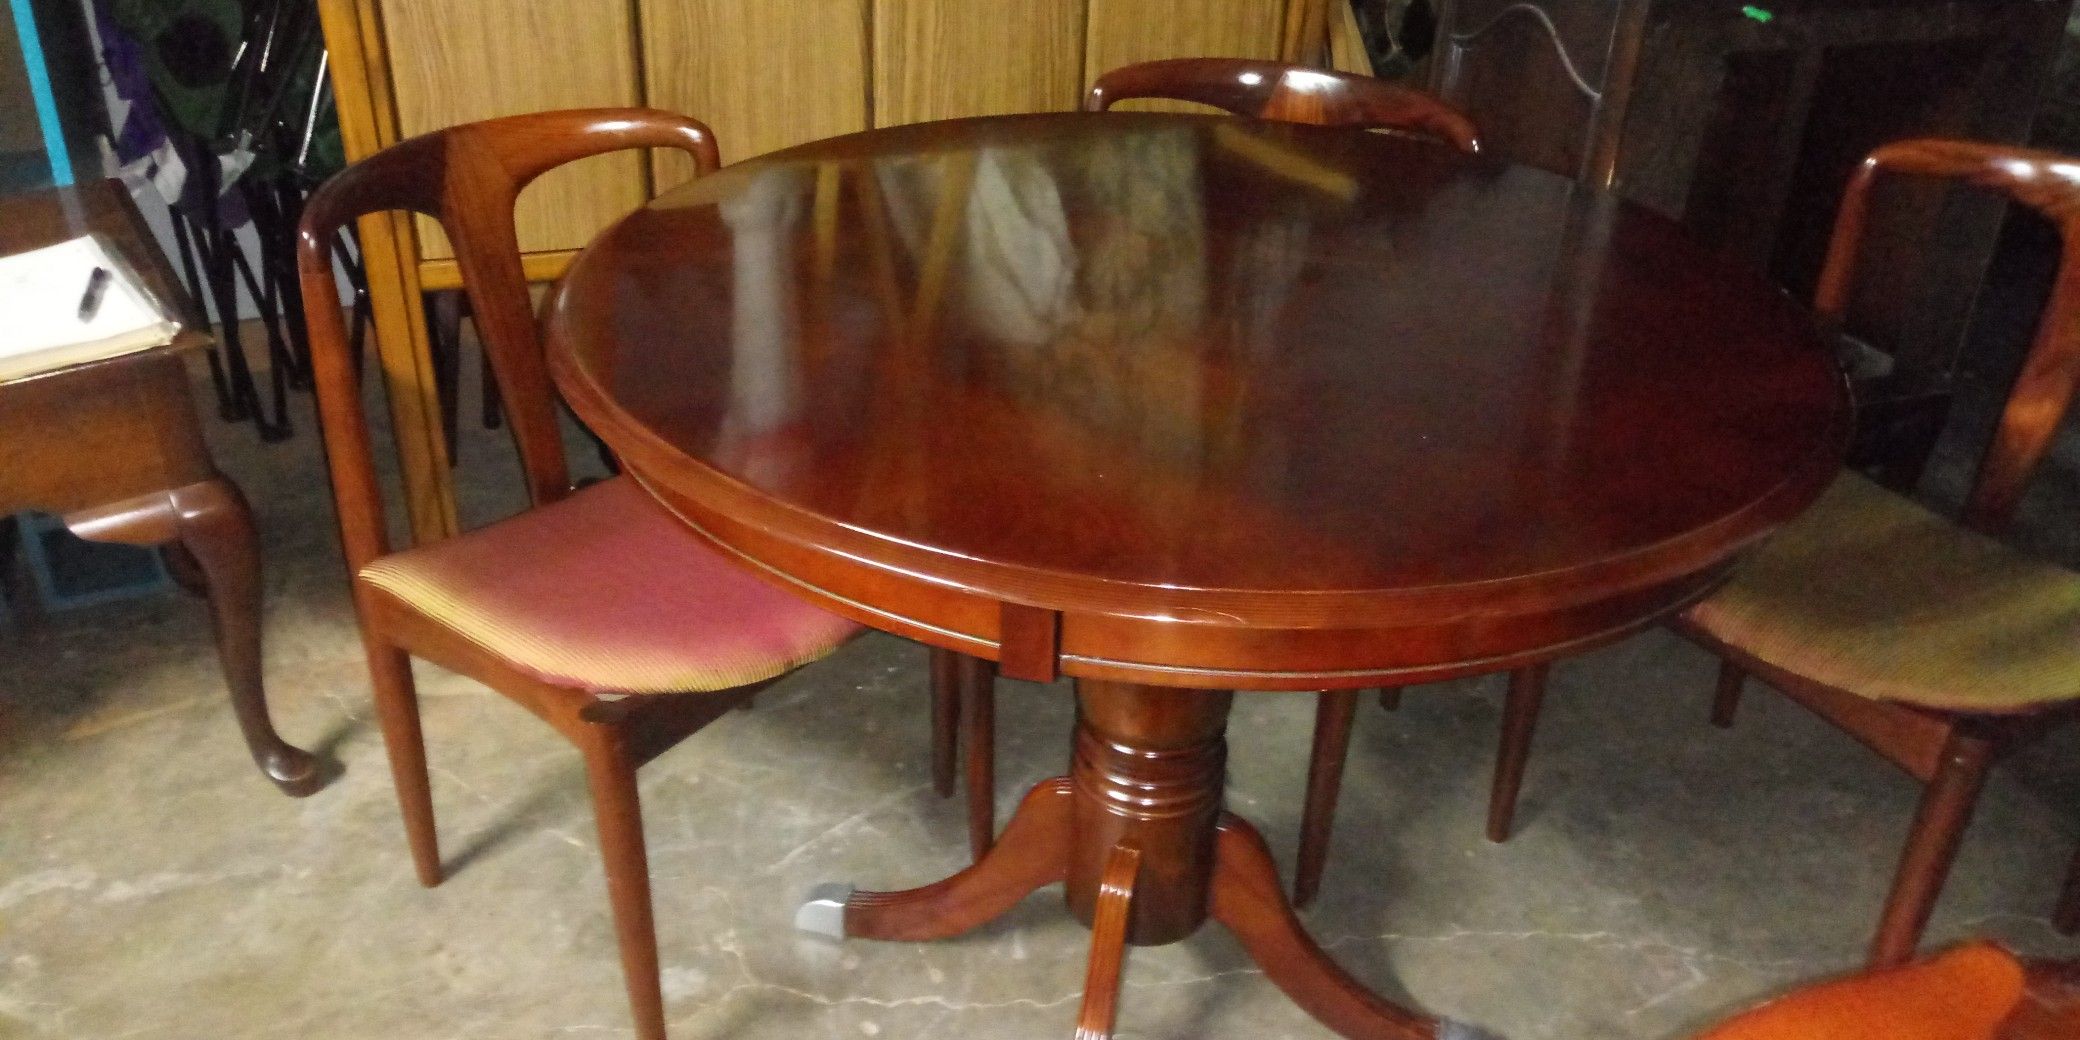 Round pedestal dining table 31 inches tall x 39 round with 3 matching chairs